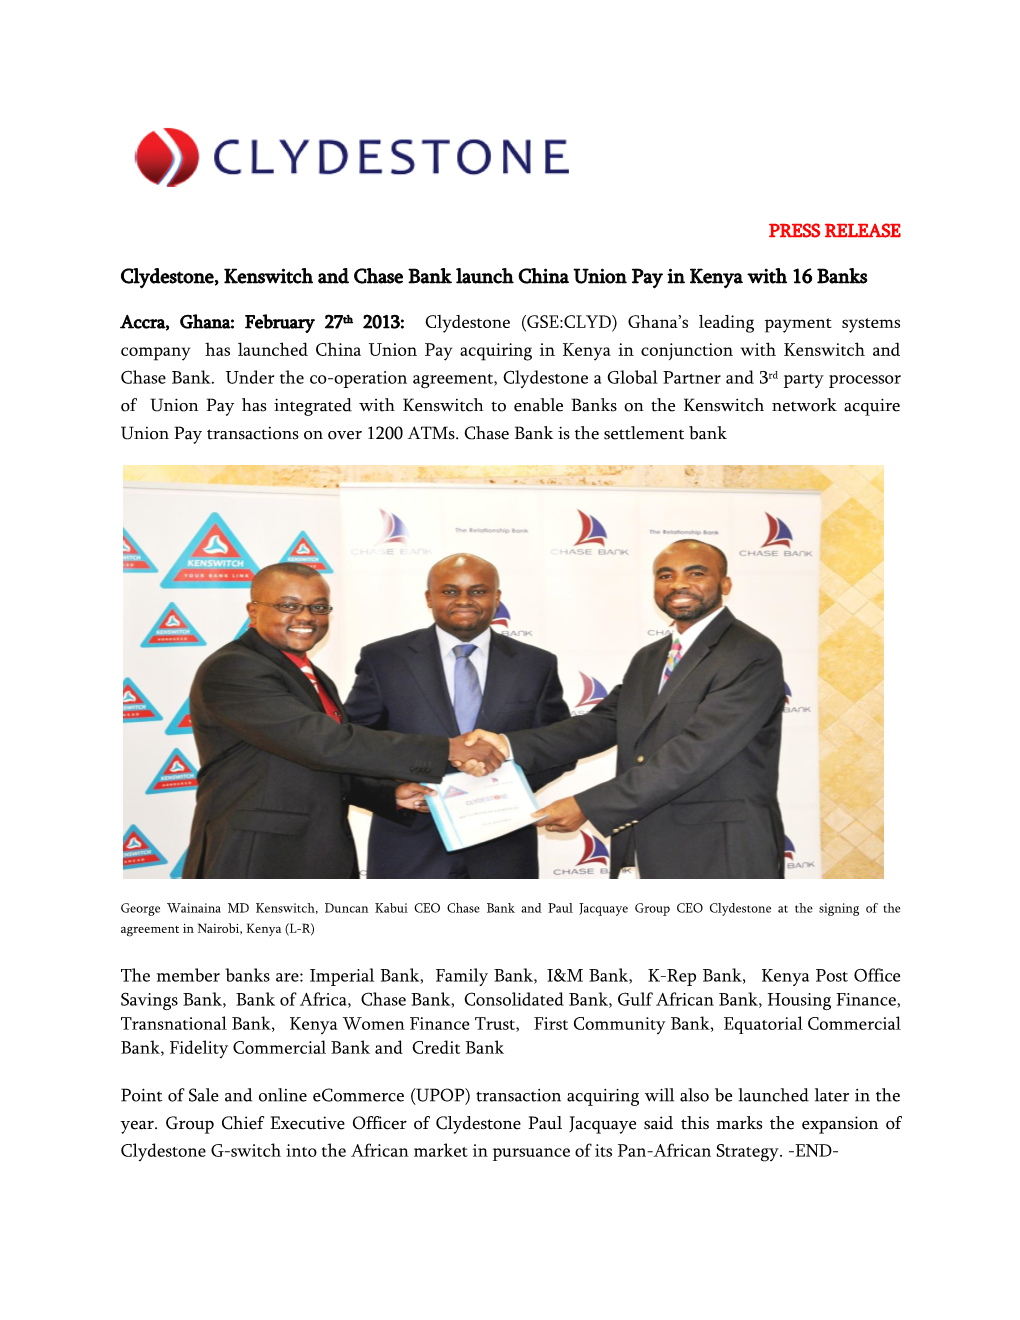 Clydestone, Kenswitch and Chase Bank Launch China Union Pay in Kenya with 16 Banks